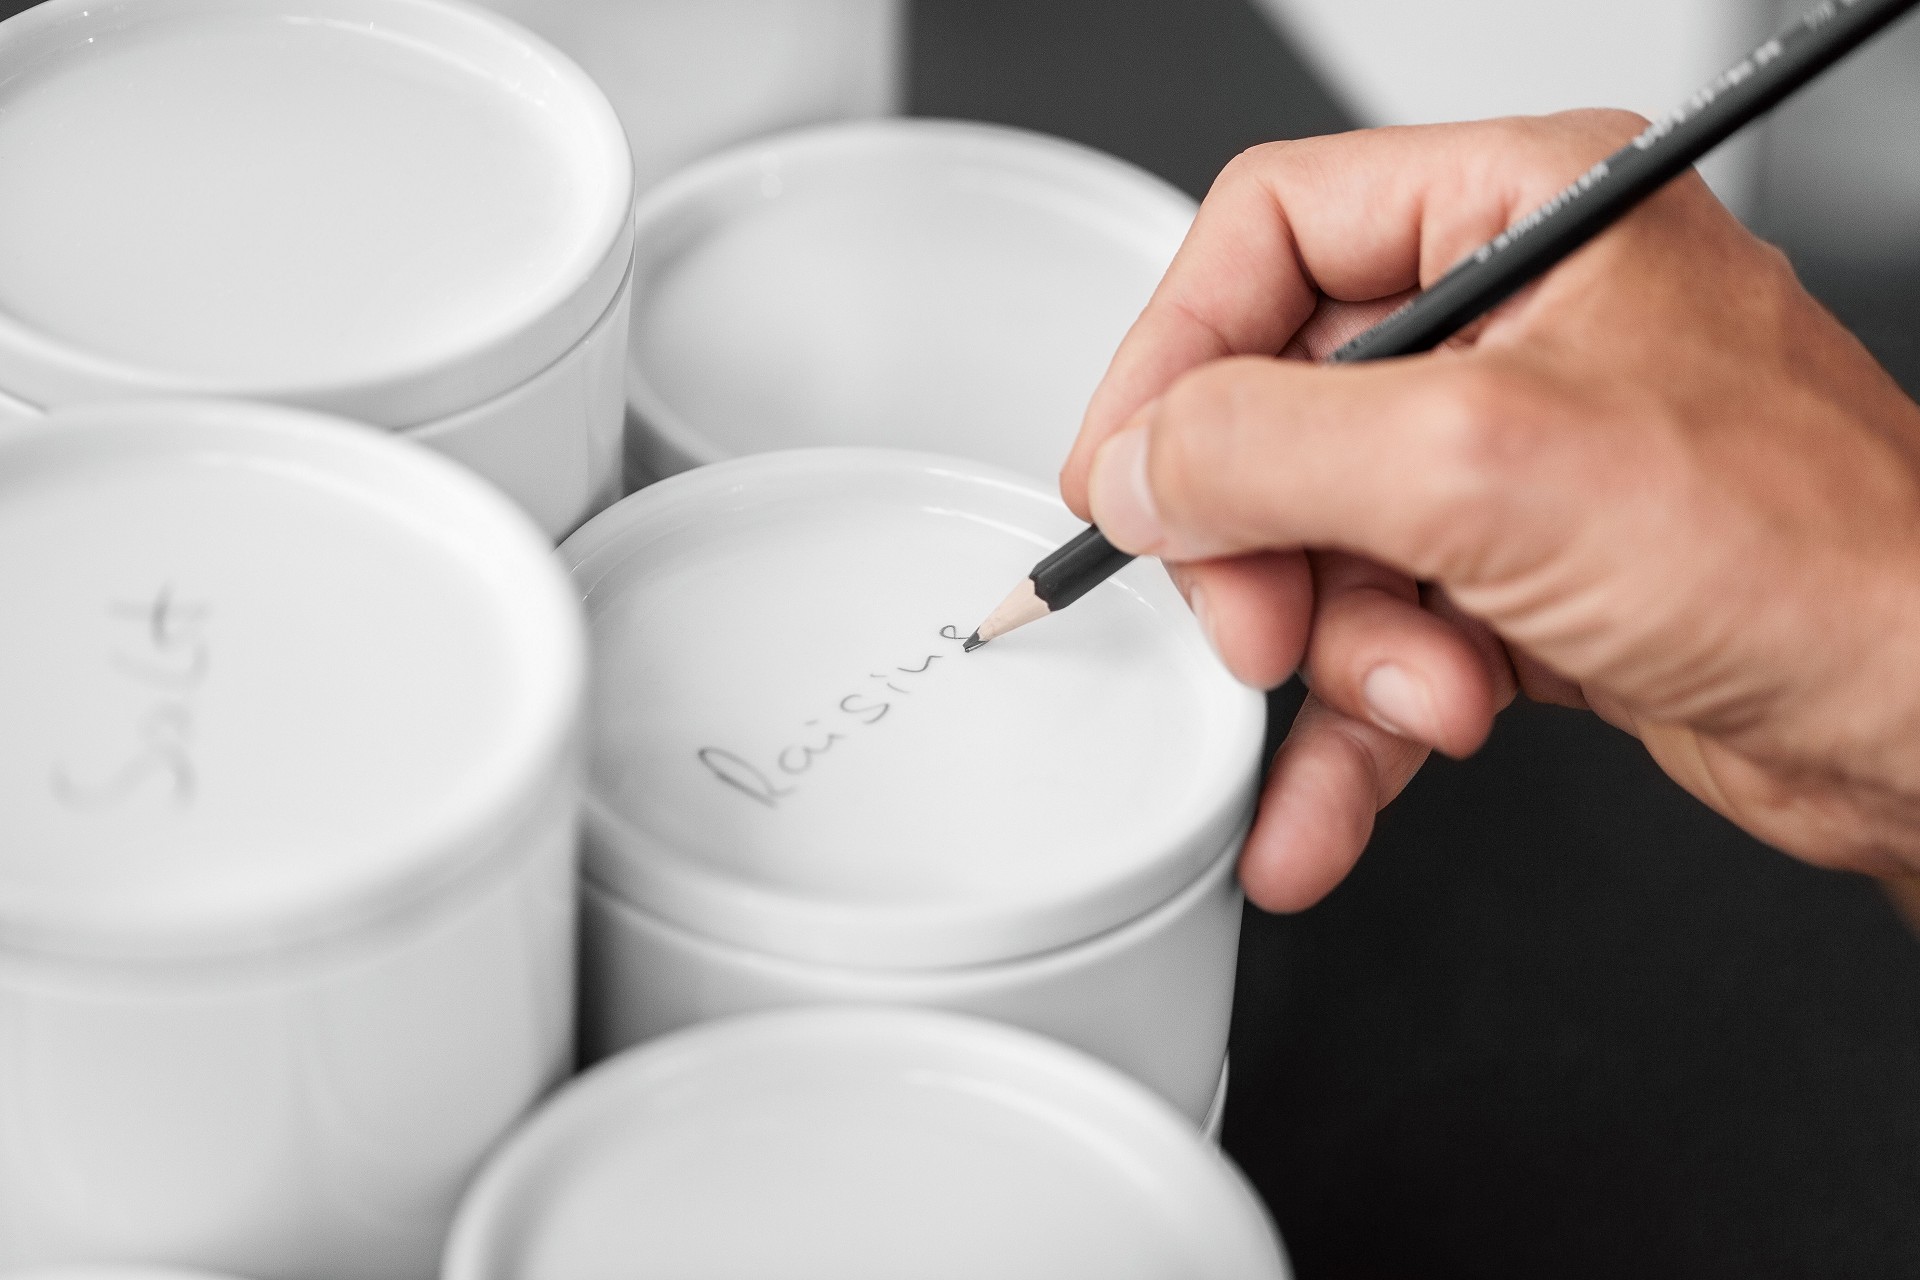 White SieMatic porcelain containers individually labeled in pencil